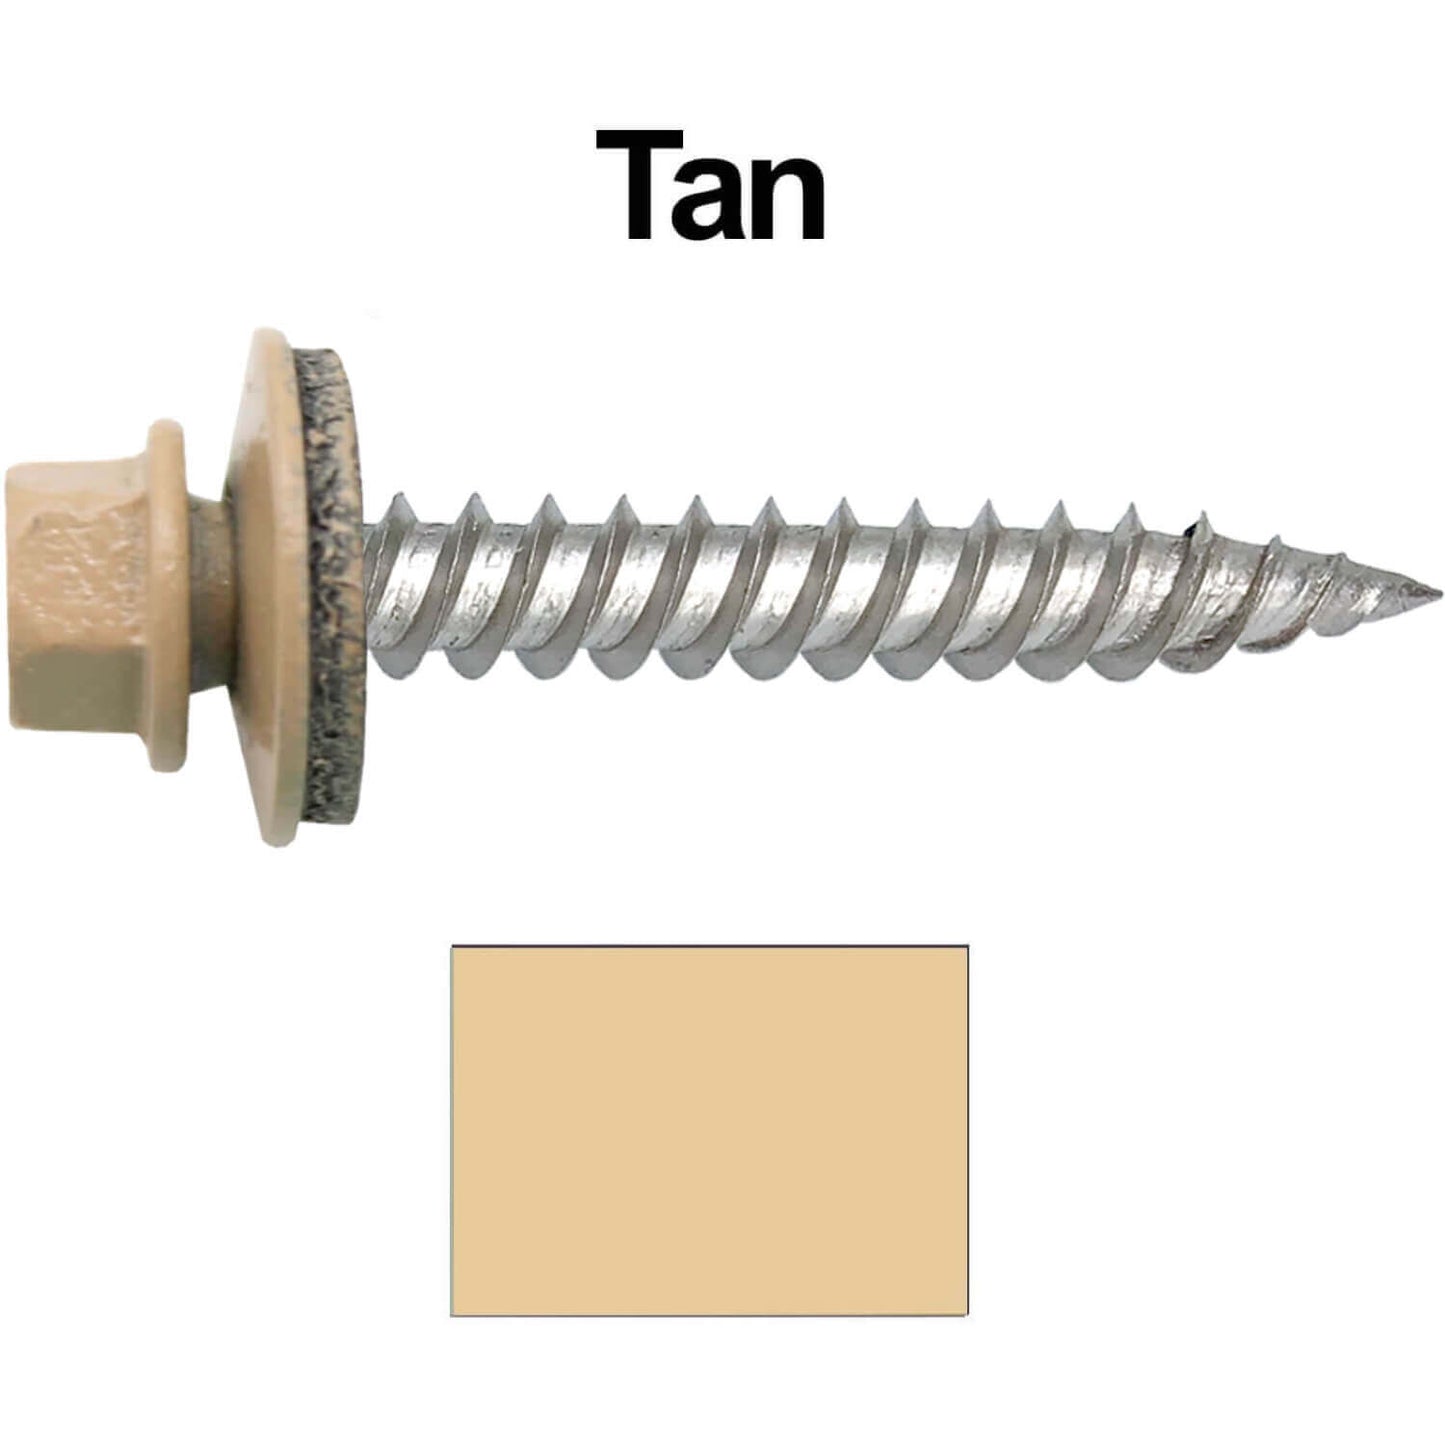 12 x 1-1/2" Stainless Steel Metal Roofing Screw: Hex ReGrip Sheet Metal Roof Screw. Sharp Point metal to wood siding screws. 5/8" EPDM washer. Most Colors Special Order Only